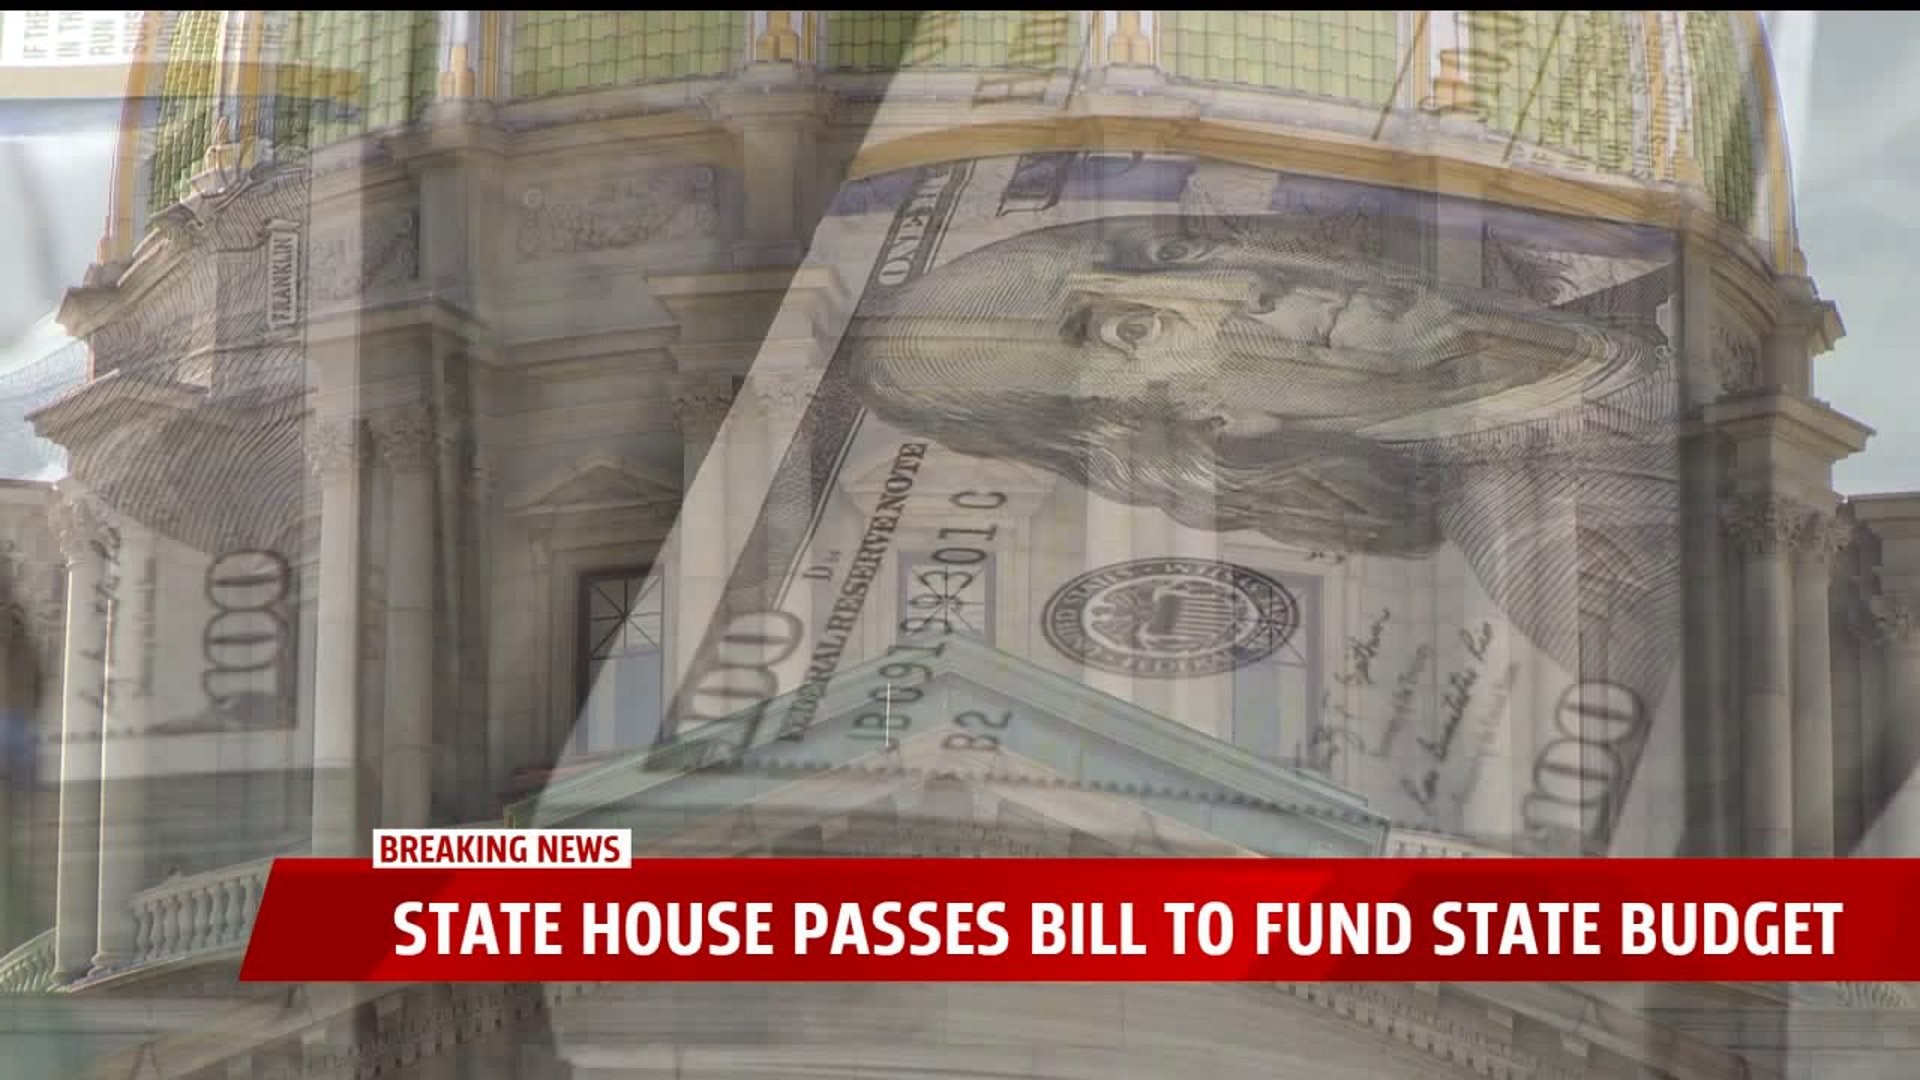 State house passes bill to fund state budget